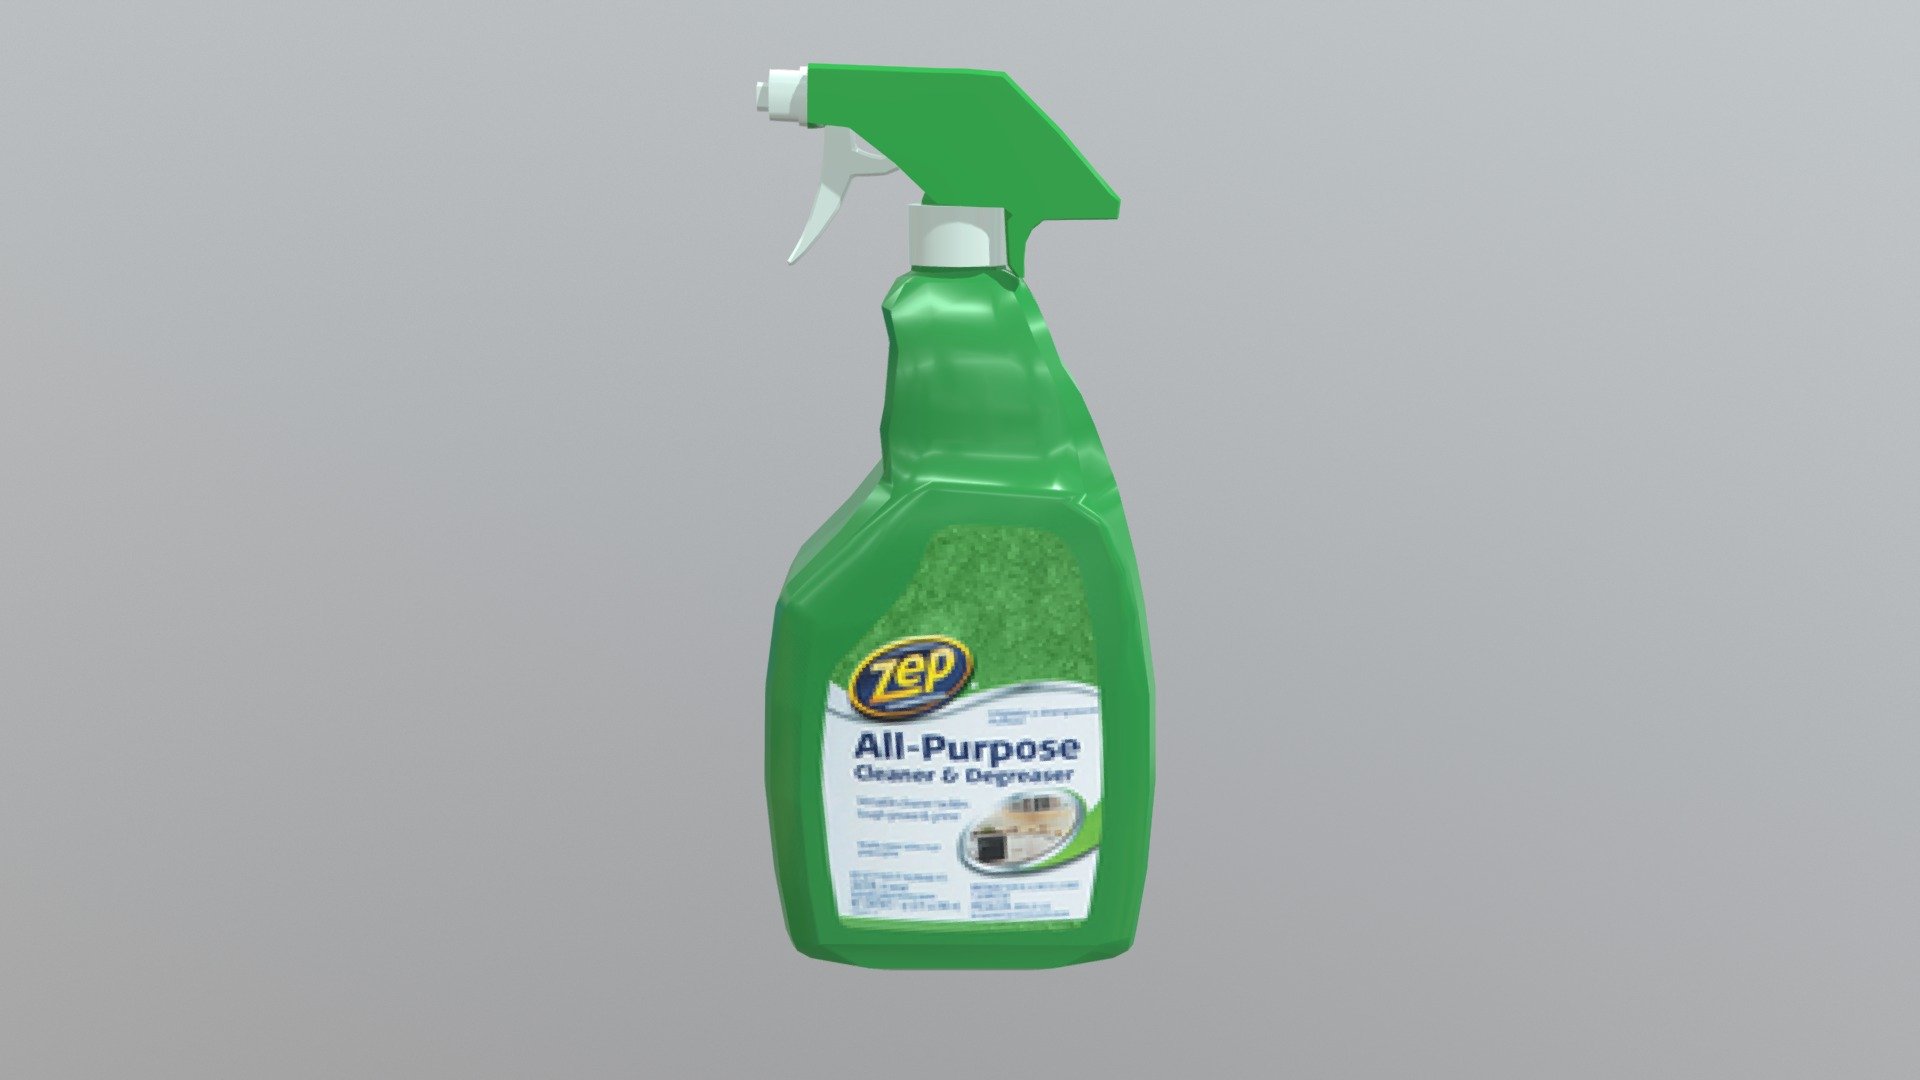 Cleaning Product. Texture was only copied from image of this brand, I don't own that image or copyright. Model is a little over 750 polys total 3d model